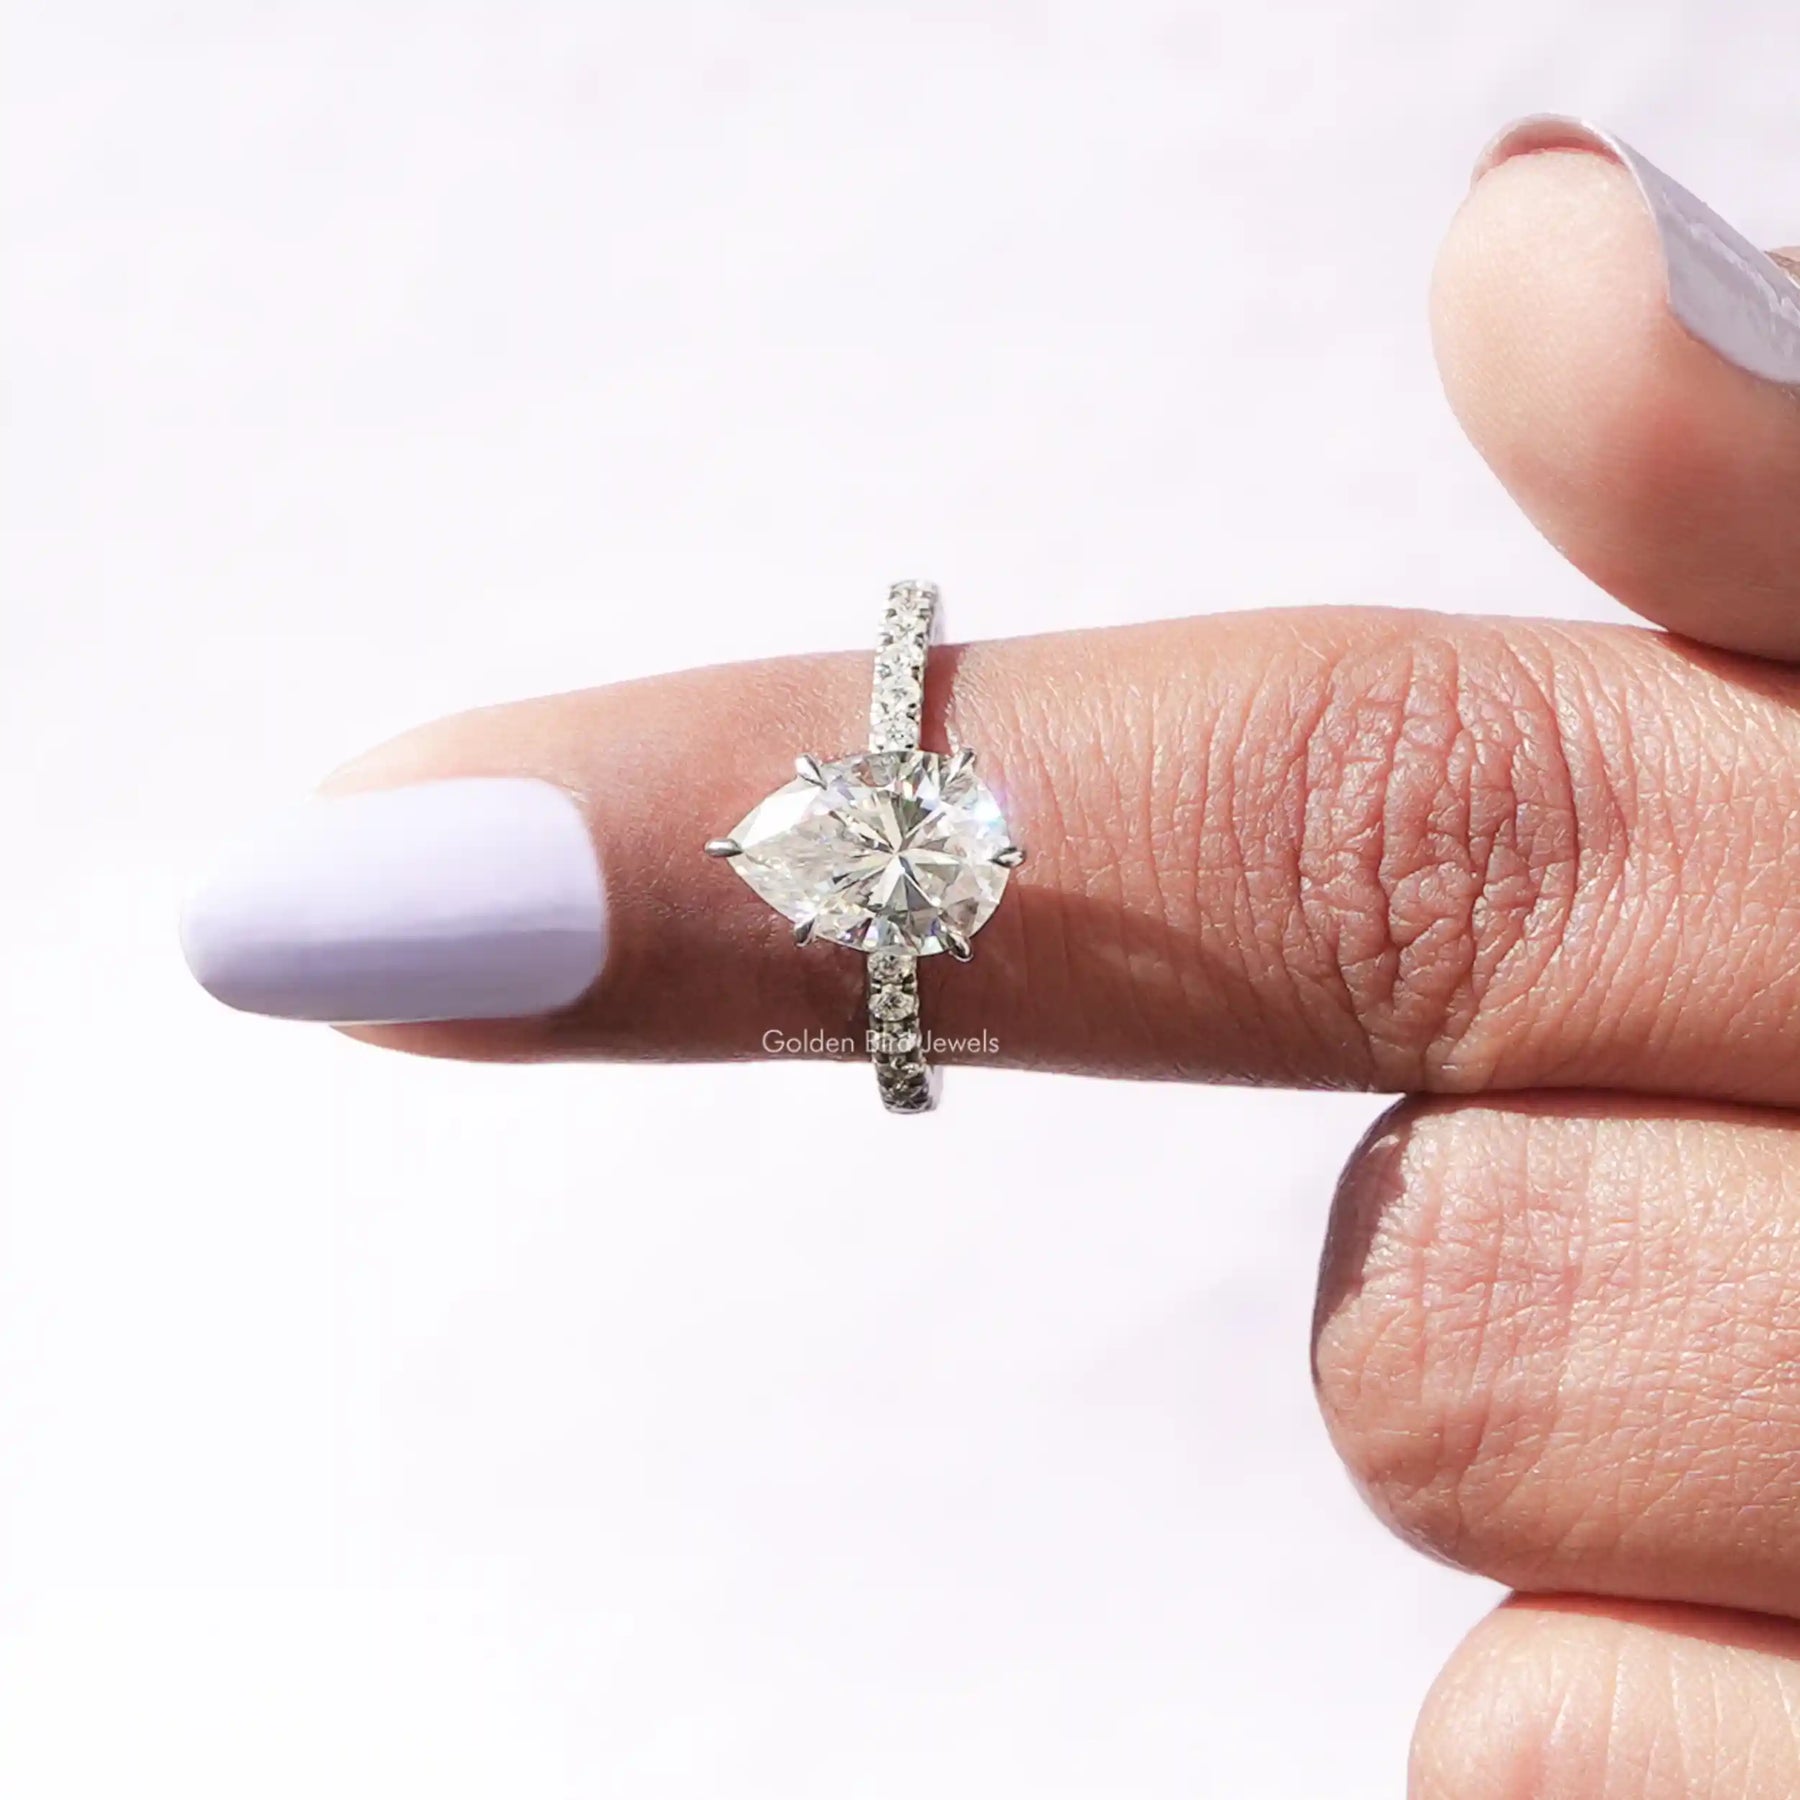 [This pear cut moissanite ring made of 14k white gold and prong setting]-[Golden Bird Jewels]